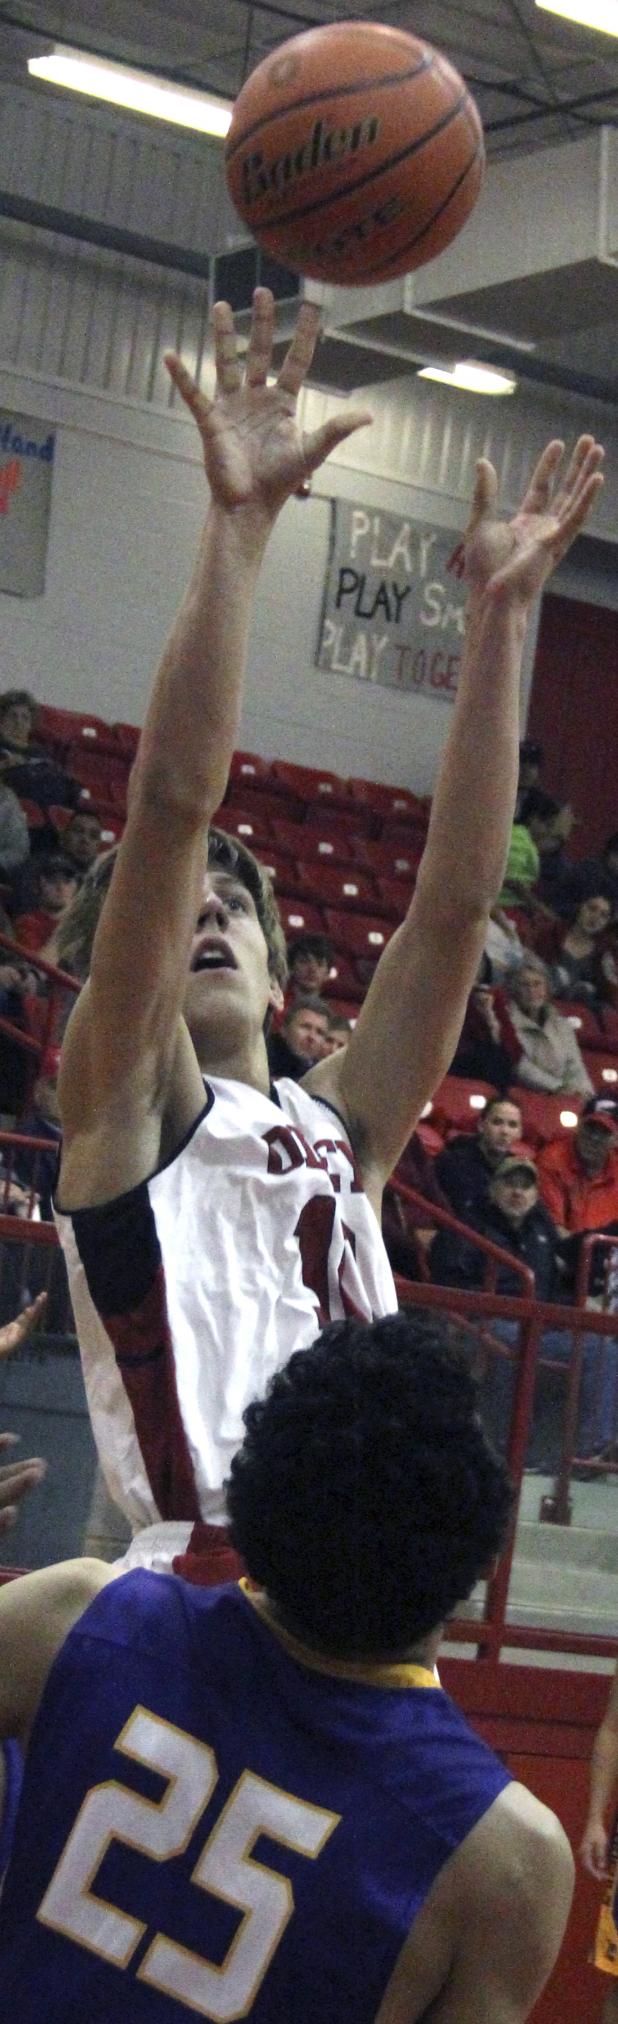 Olney High School sophomore forward Parker Mayers goes up for a jumper against Munday.